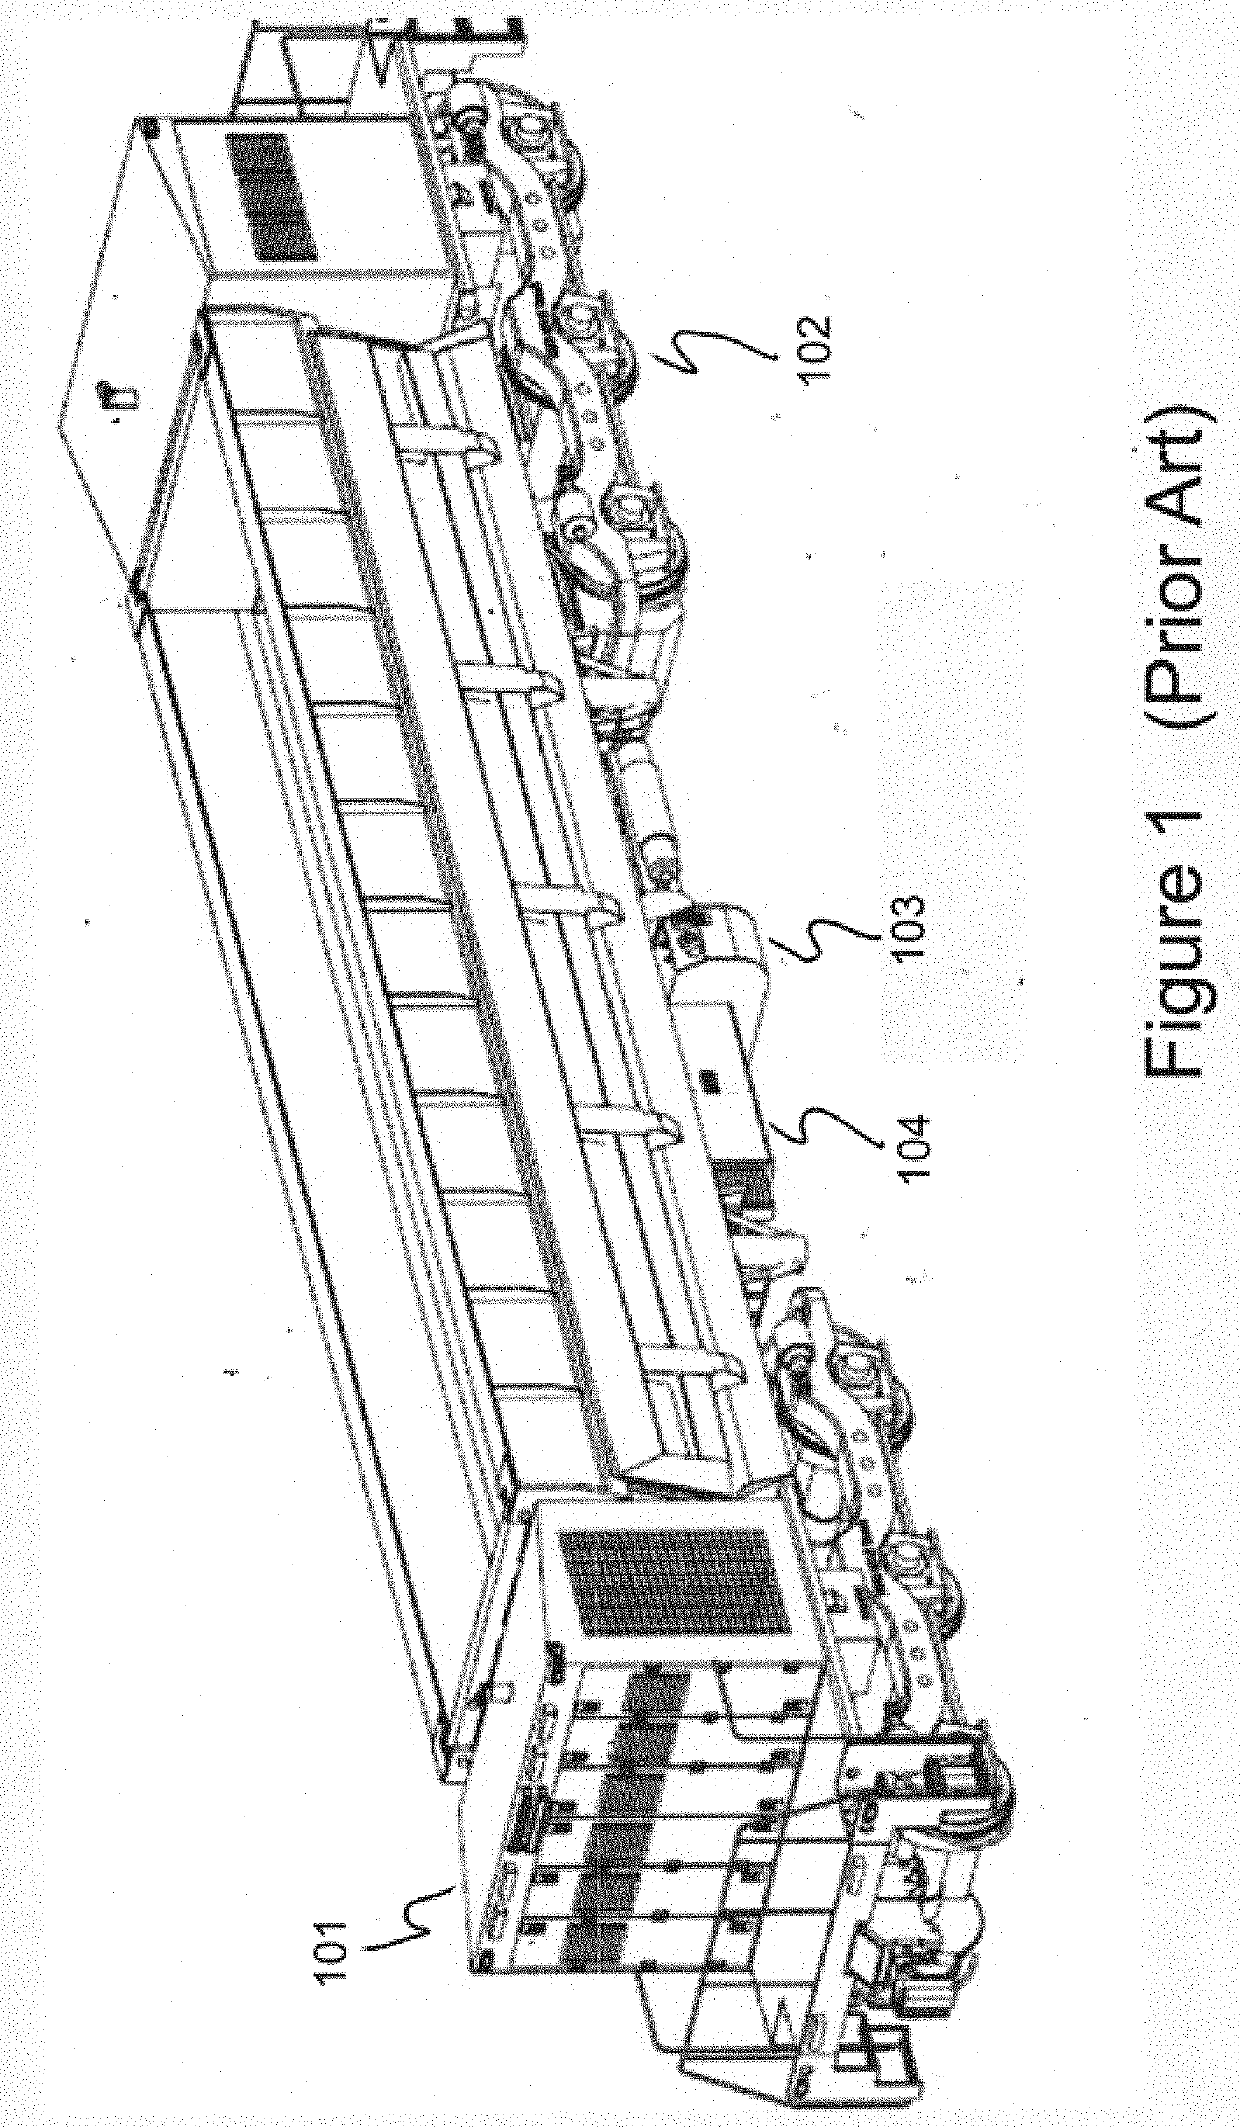 Remote operation of a powered burden rail car